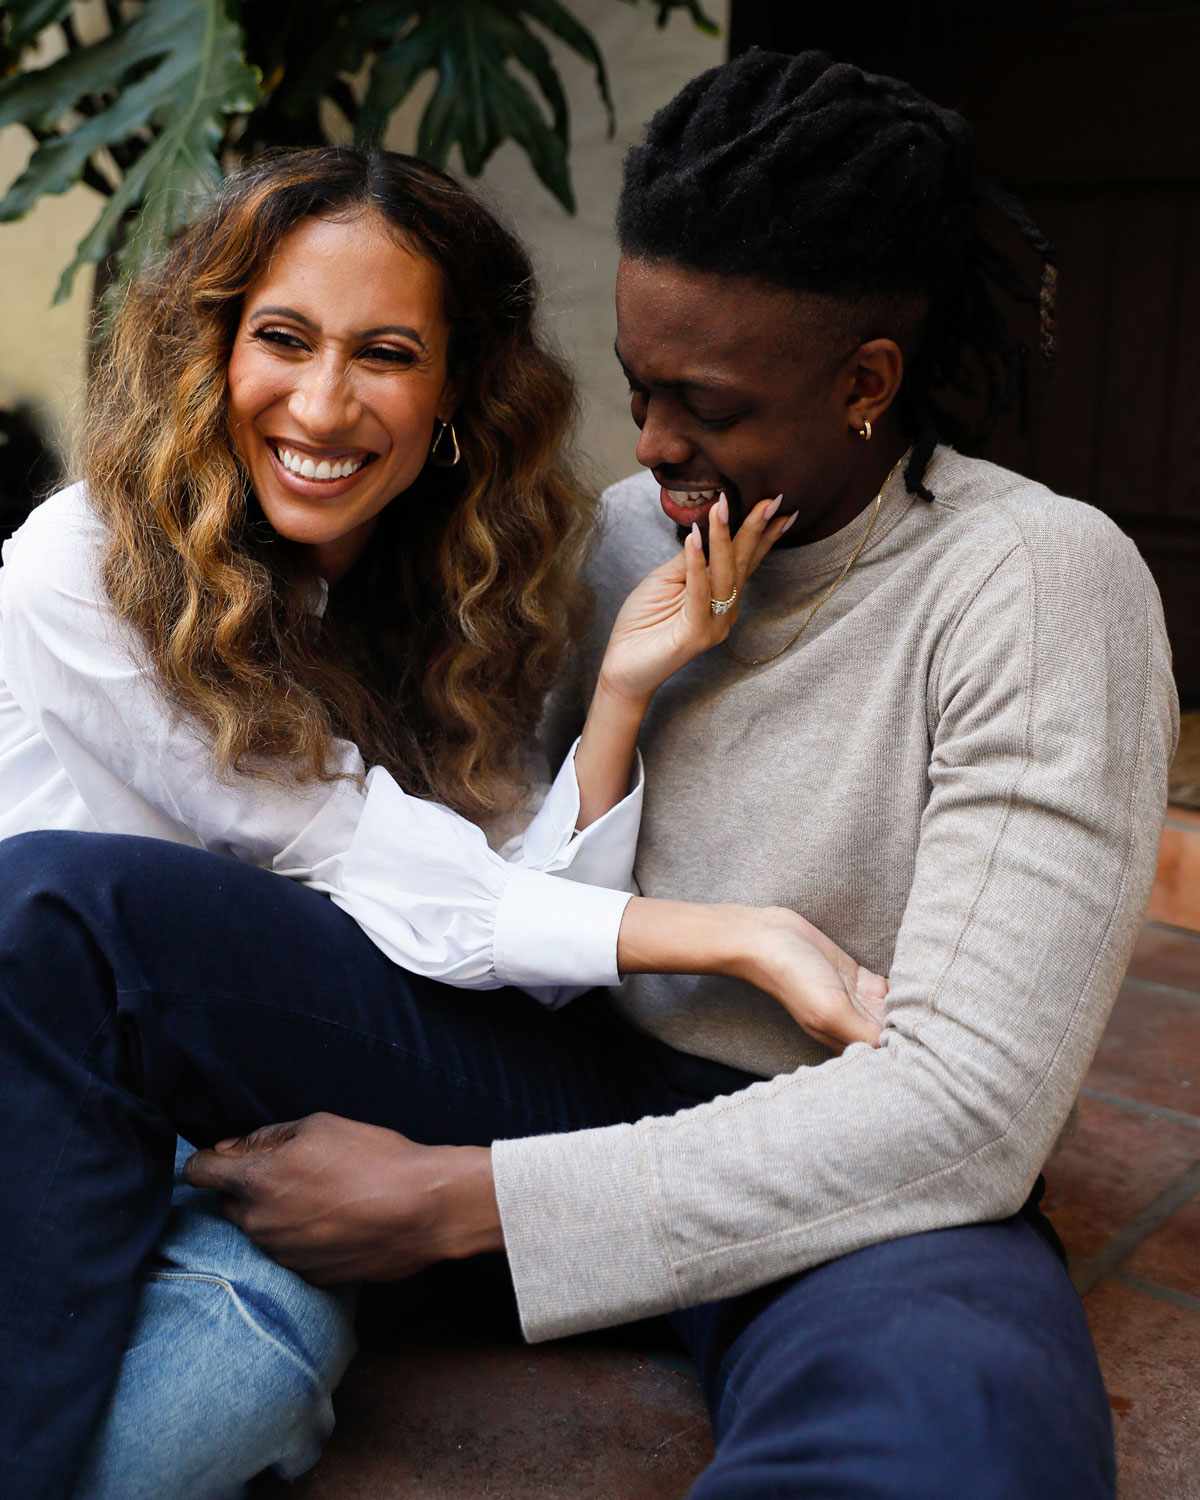 BirthFund about Elaine Welteroth and Kelly Rowland